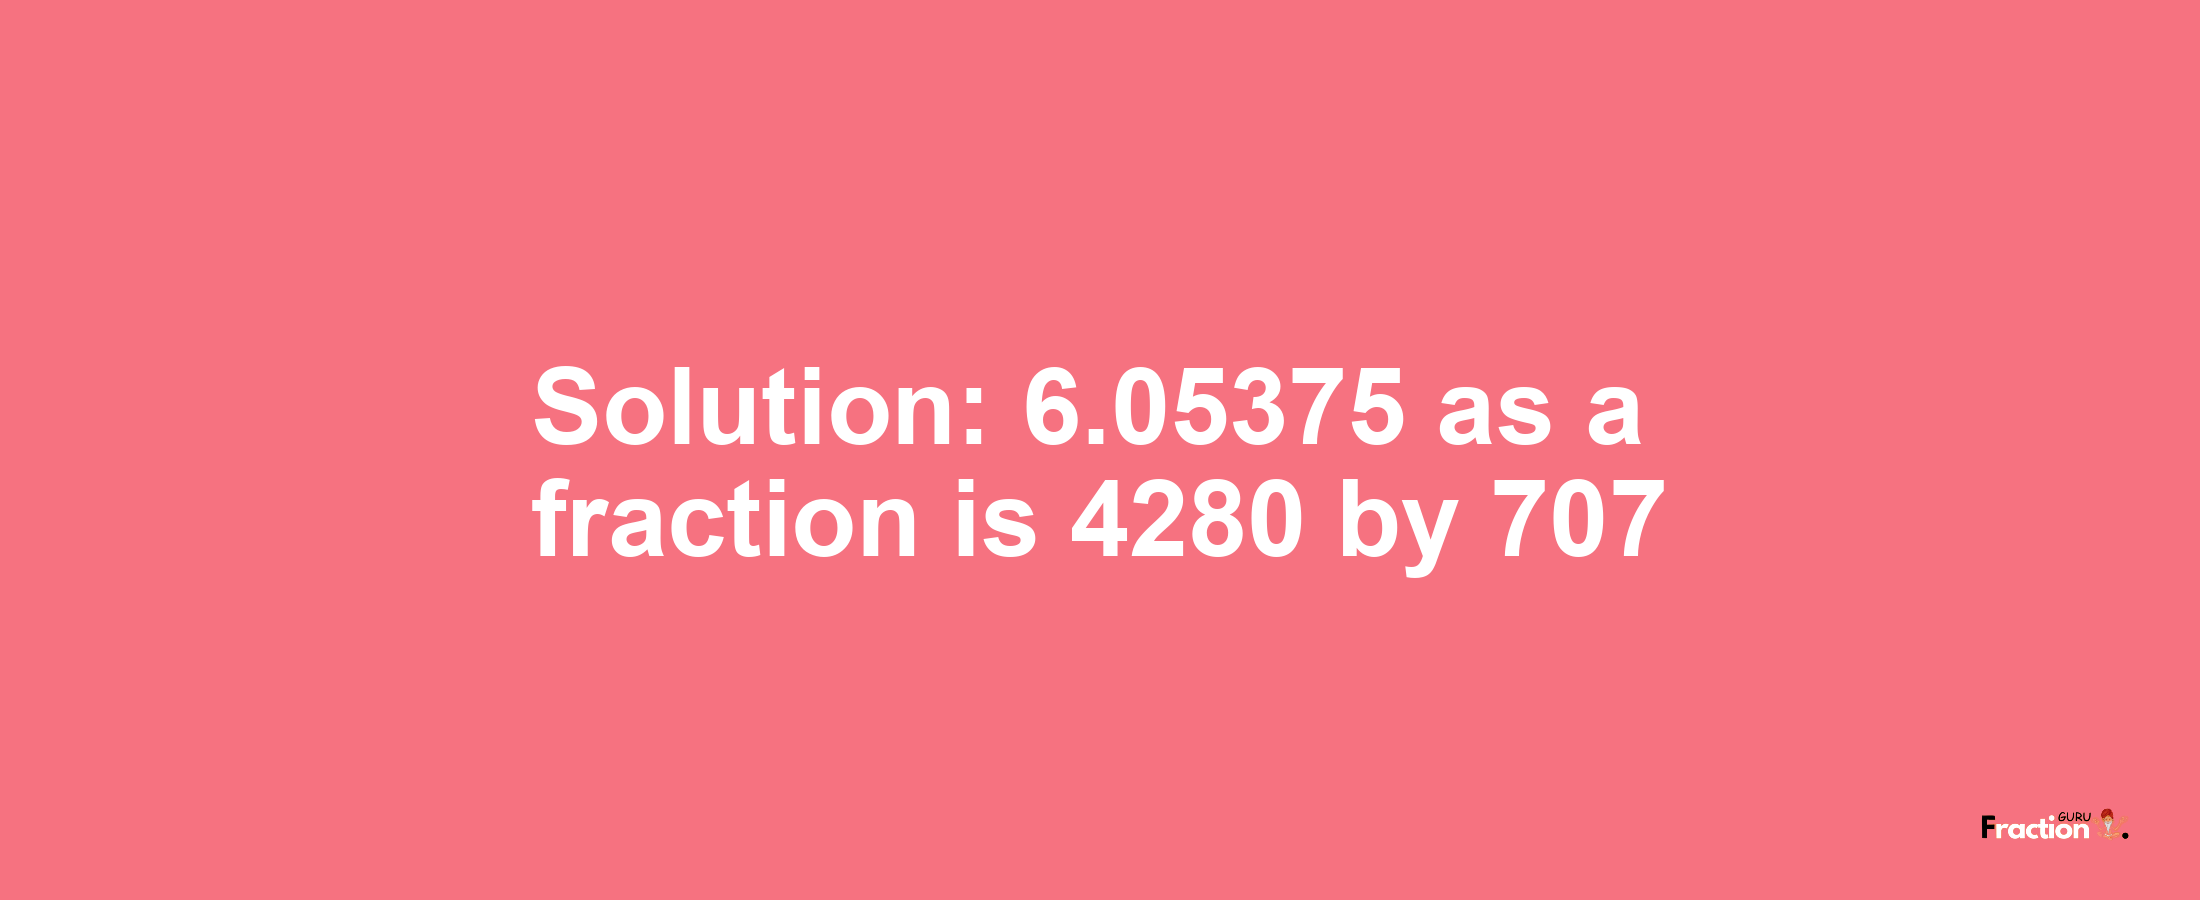 Solution:6.05375 as a fraction is 4280/707